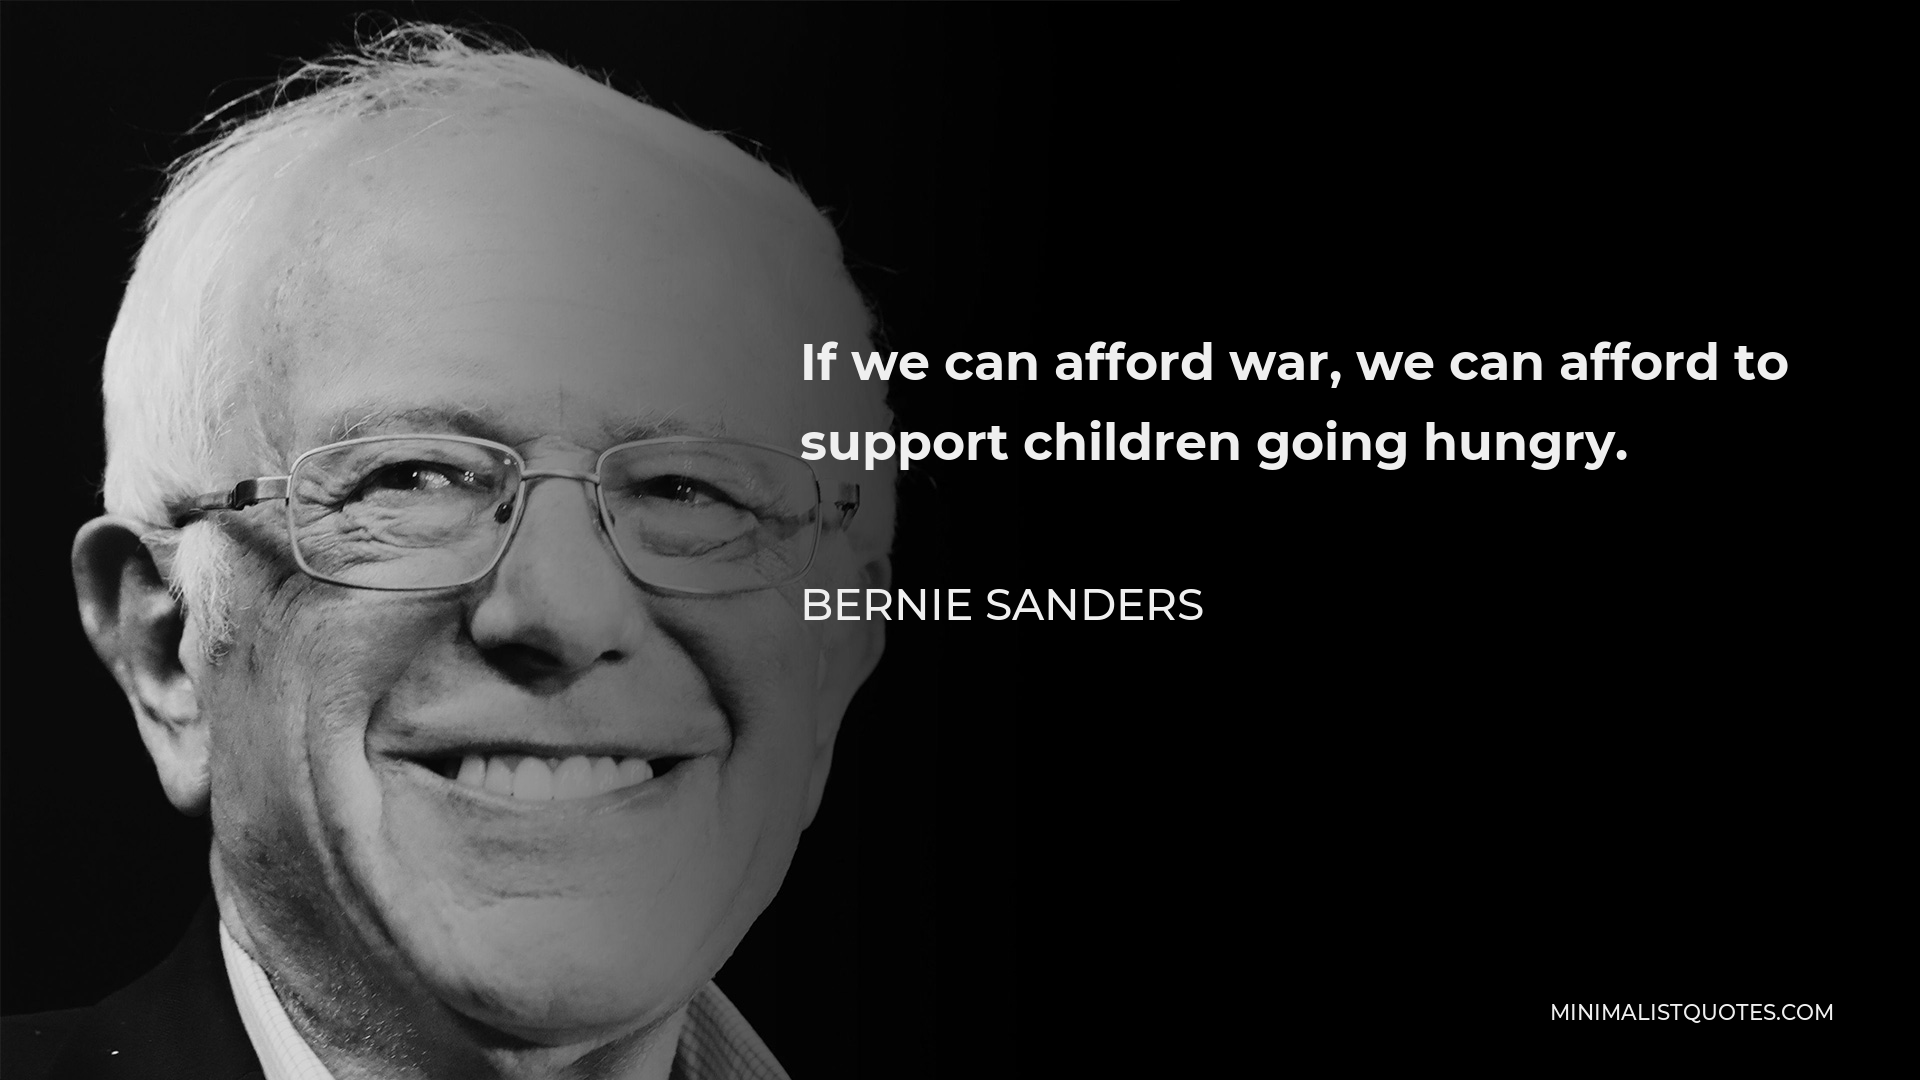 Bernie Sanders Quote - If we can afford war, we can afford to support children going hungry.